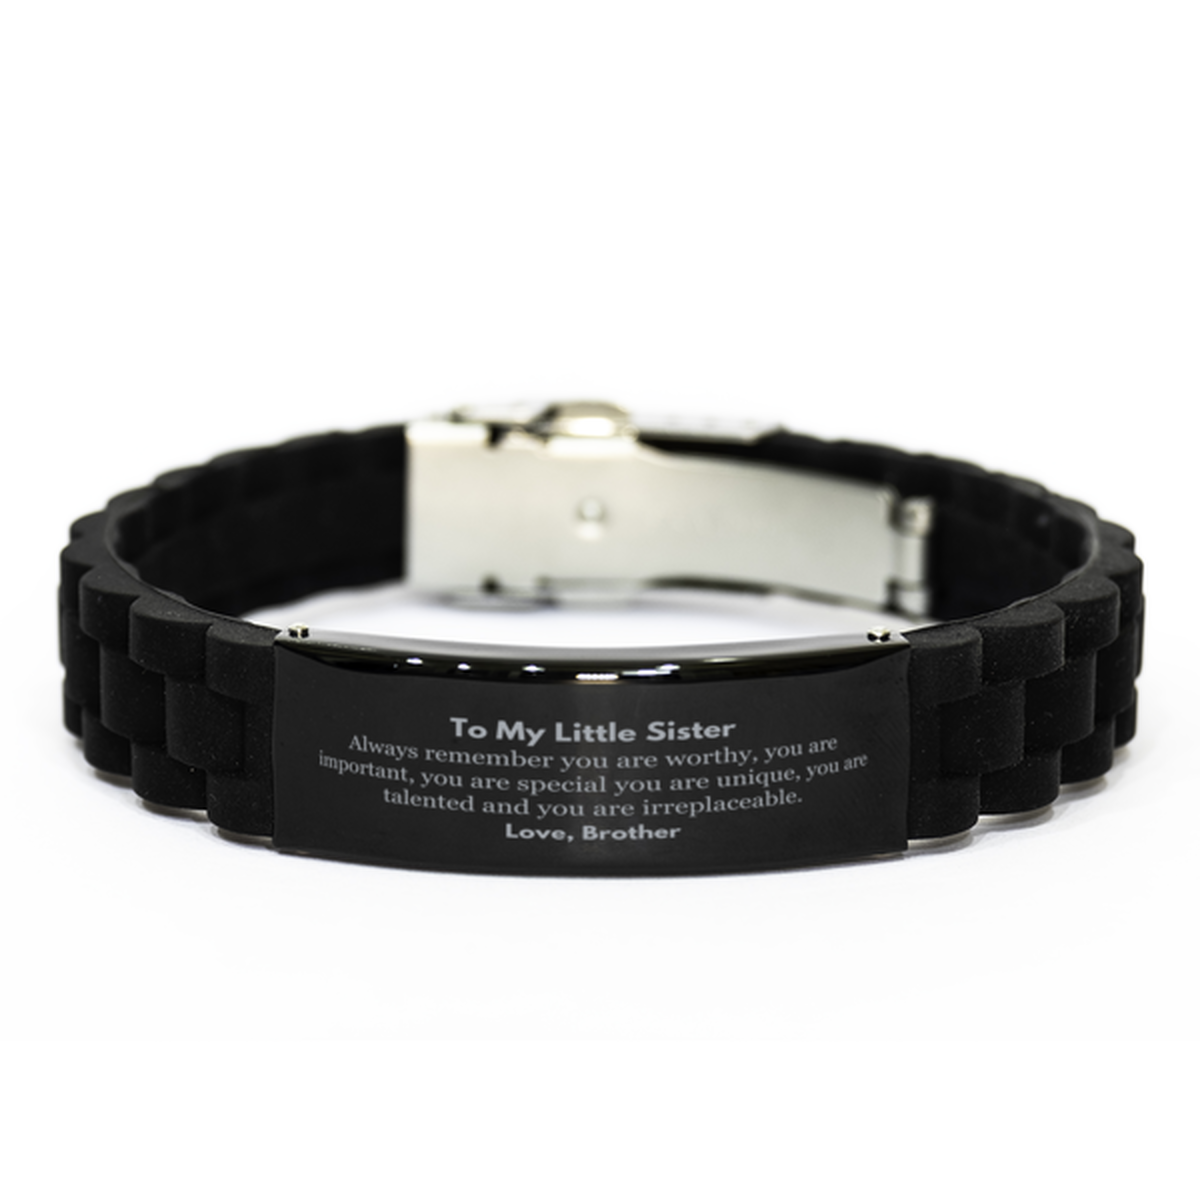 Little Sister Birthday Gifts from Brother, Inspirational Black Glidelock Clasp Bracelet for Little Sister Christmas Graduation Gifts for Little Sister Always remember you are worthy, you are important. Love, Brother